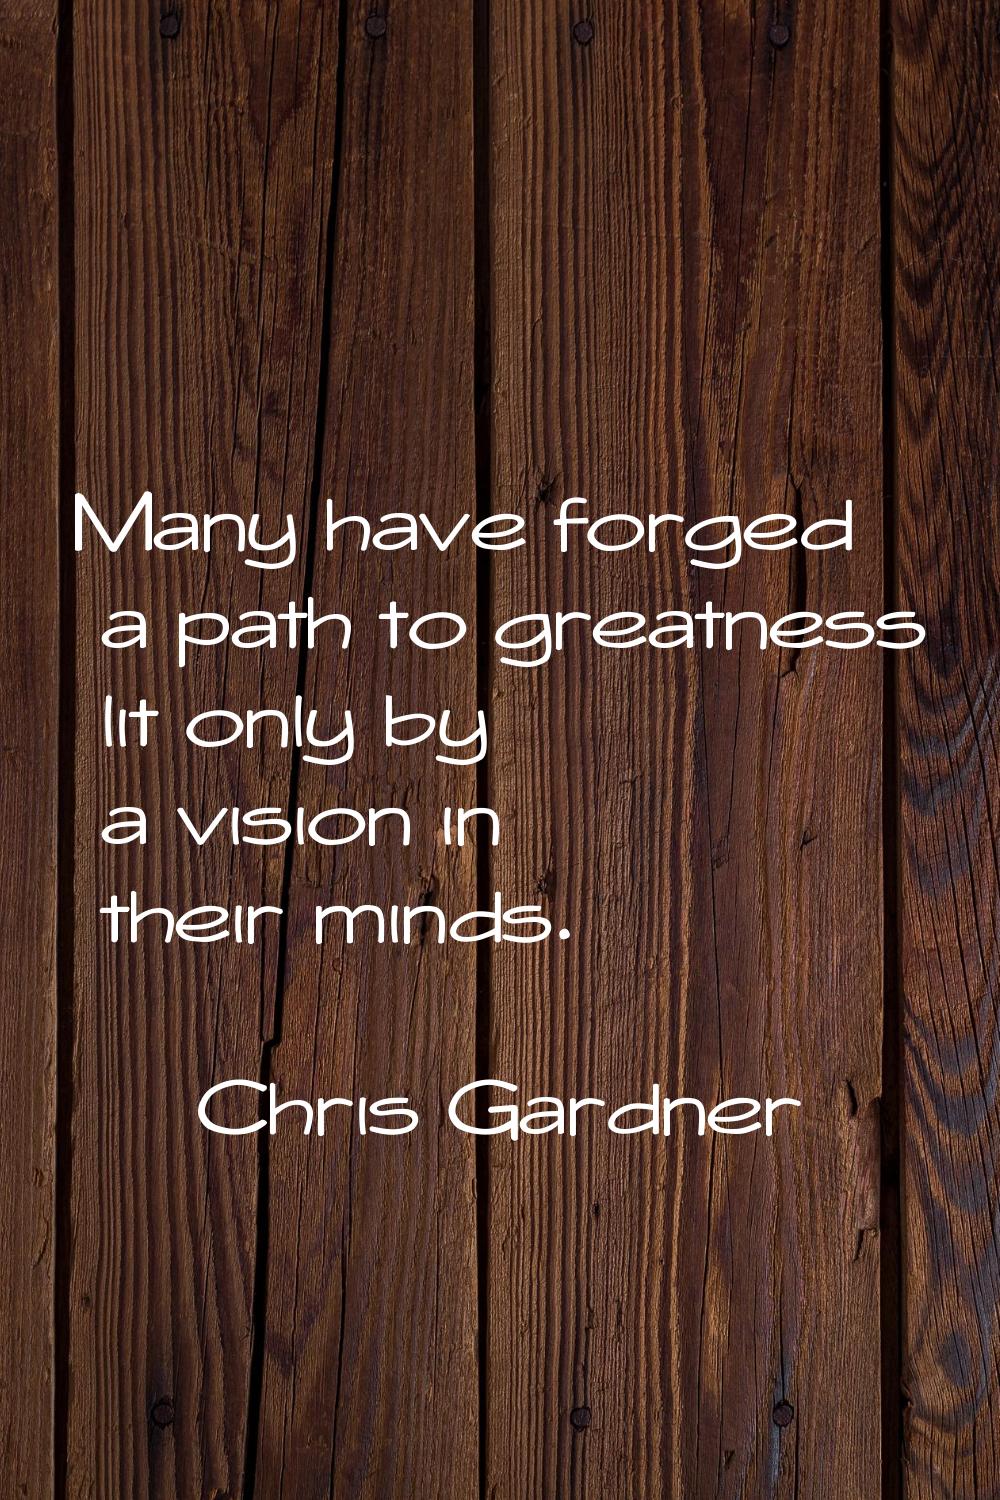 Many have forged a path to greatness lit only by a vision in their minds.